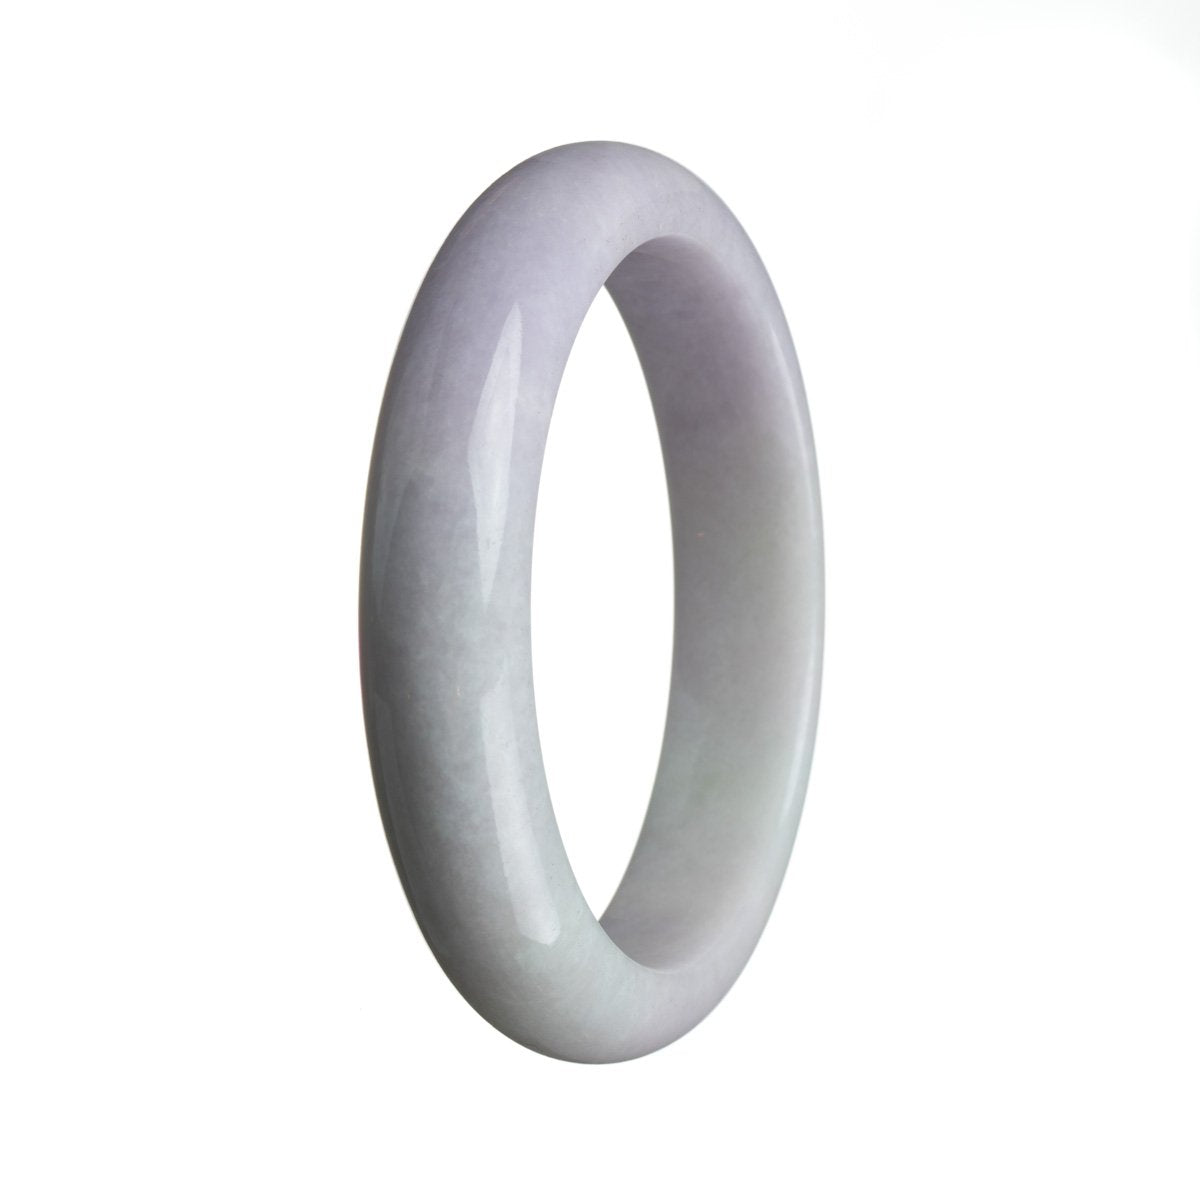 An image of a lavender Burma jade bracelet with a semi-round shape, measuring 60mm. The bracelet is certified as Type A and is sold by MAYS.